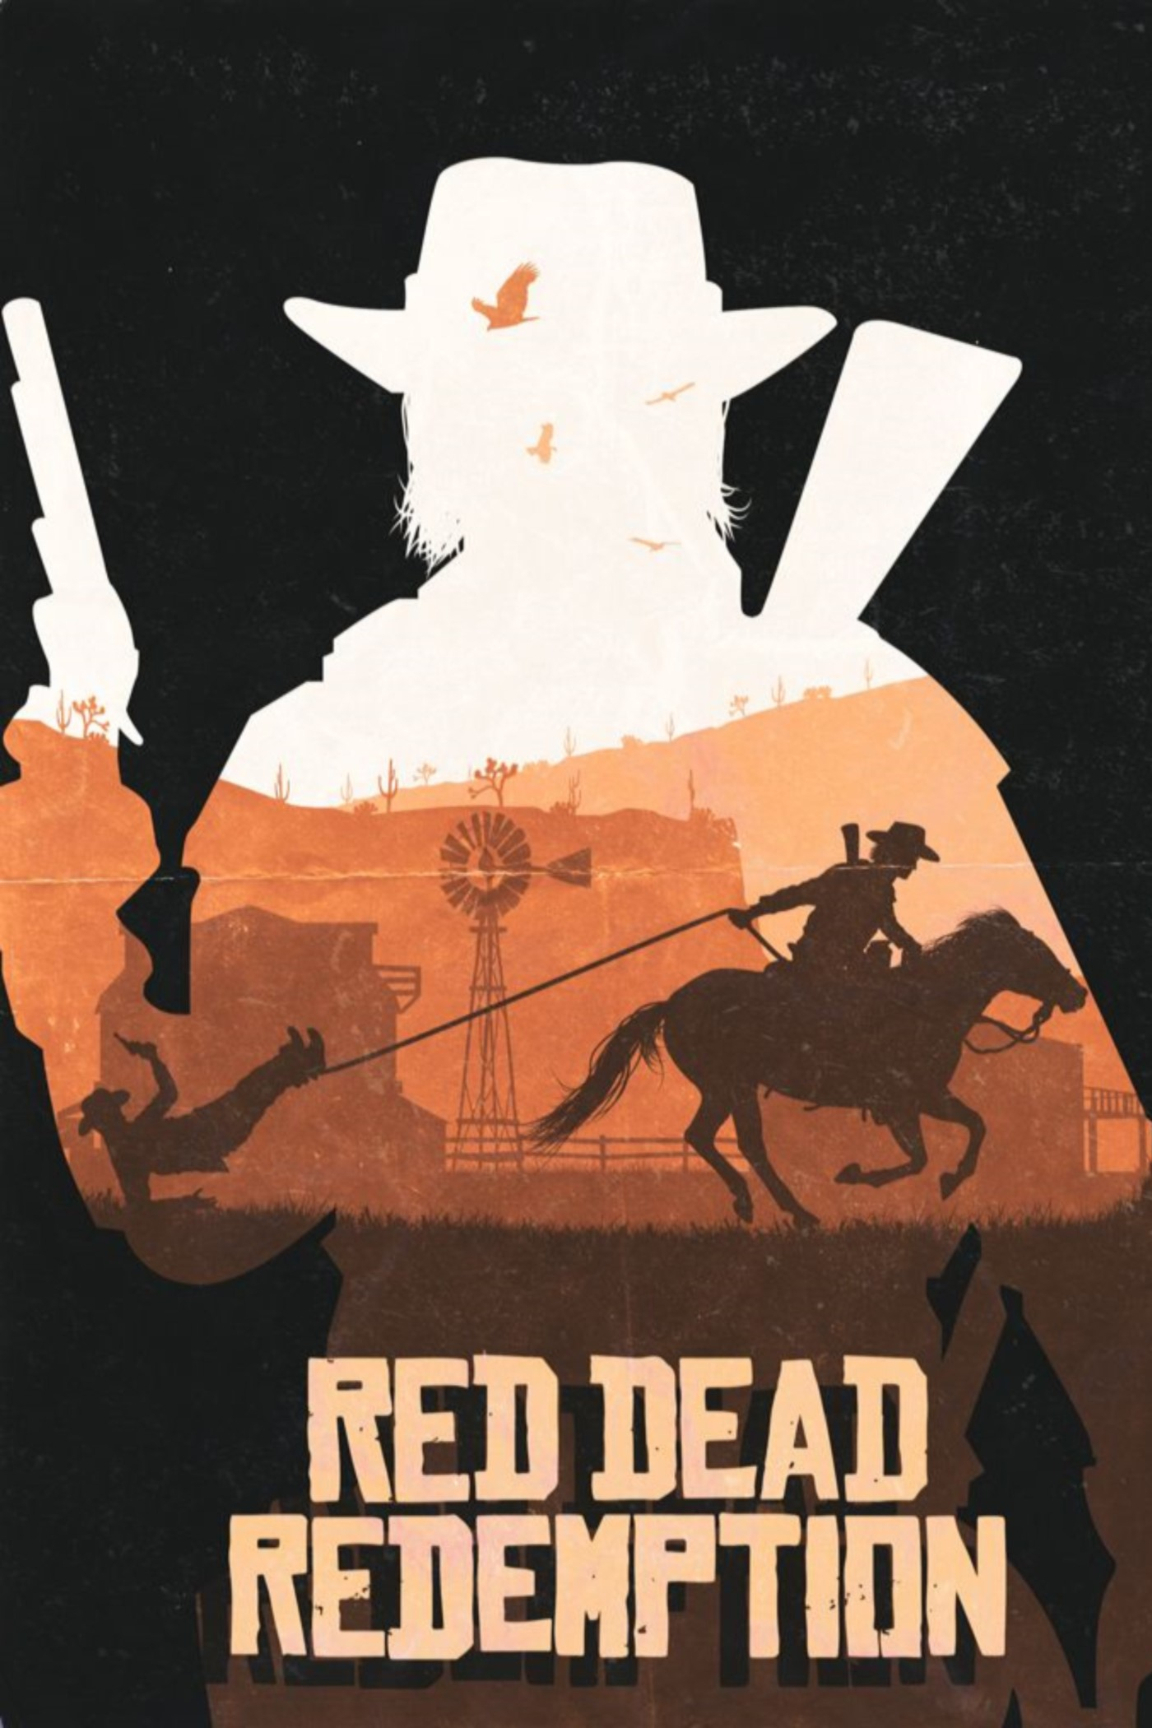 Dead posters. Red Dead Redemption 1 Постер. Red Dead Redemption 2 Постер. Red Dead Redemption 2 плакат. Red Dead Redemption 1 плакат.